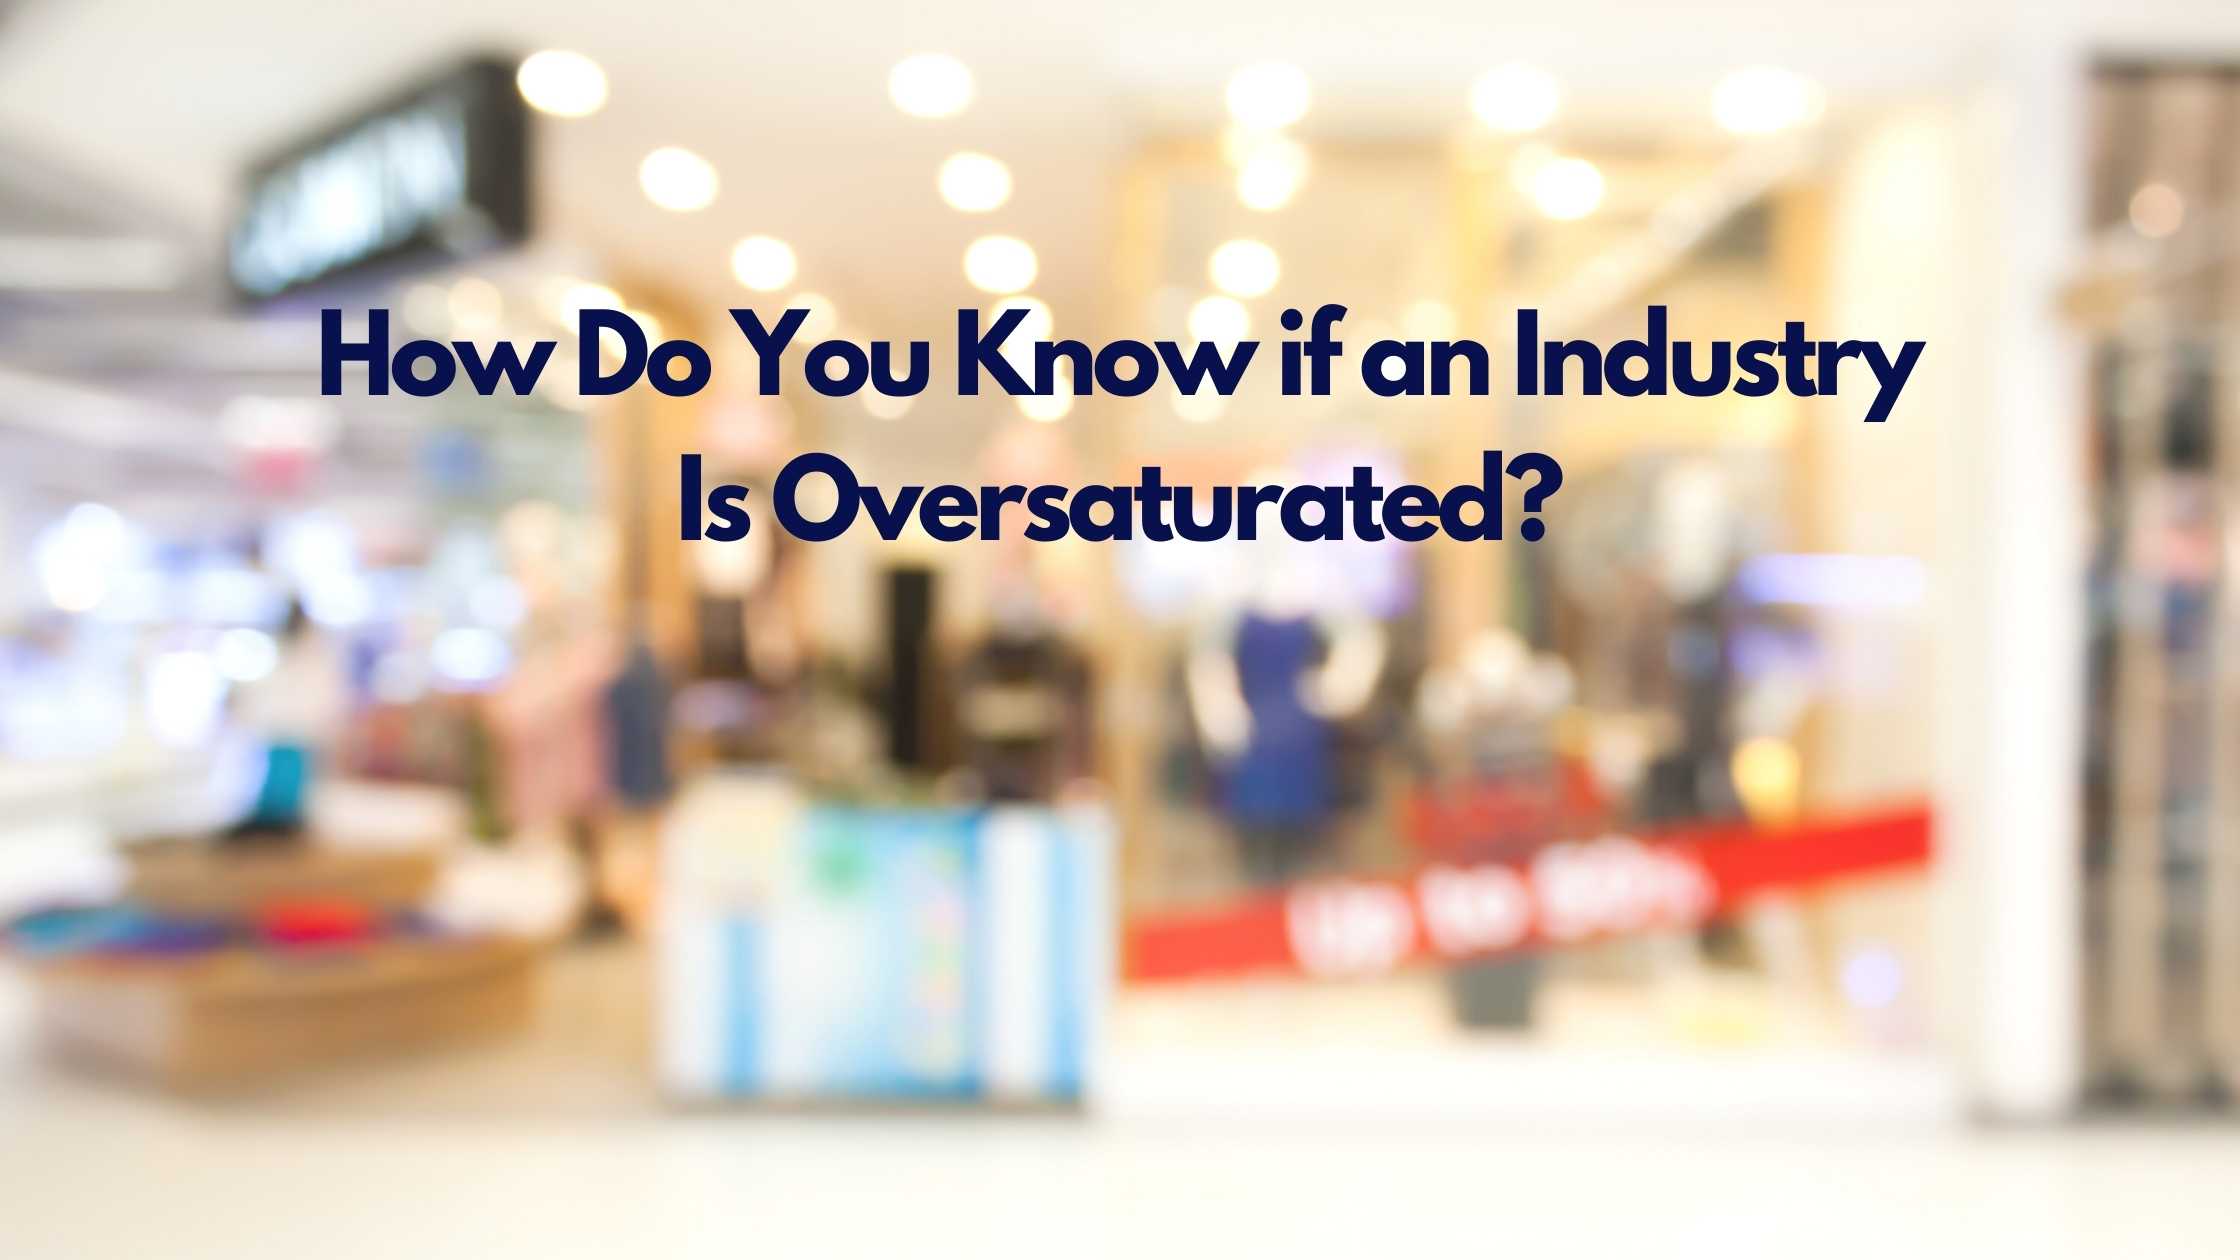 How Do You Know if an Industry Is Oversaturated?